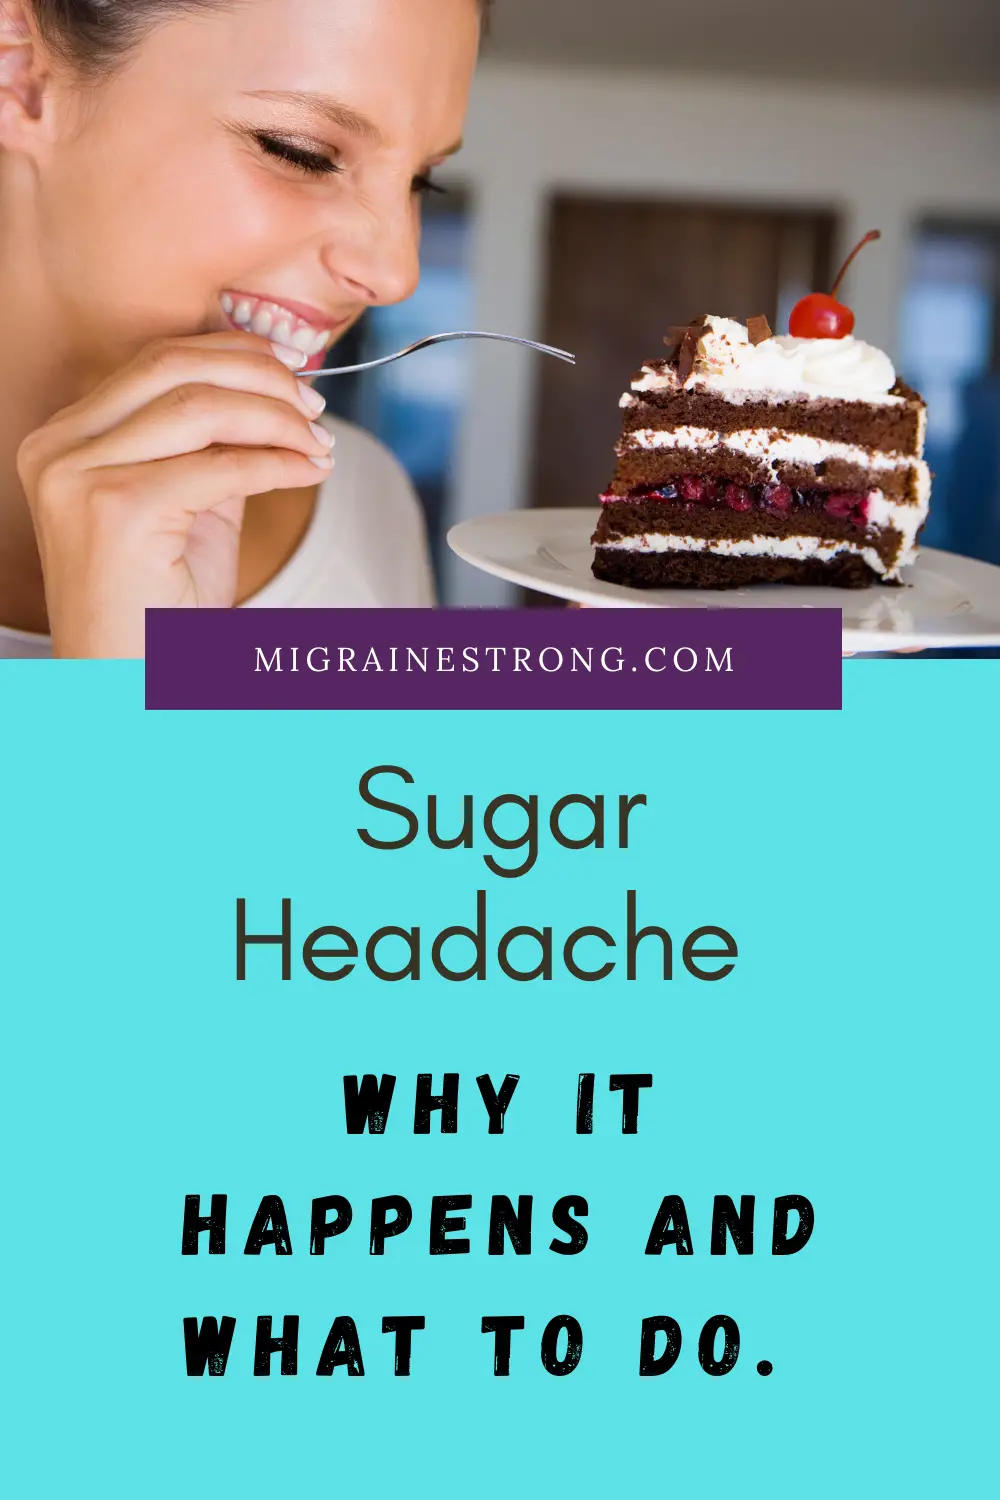 Sugar and Migraines-All You Need To Know